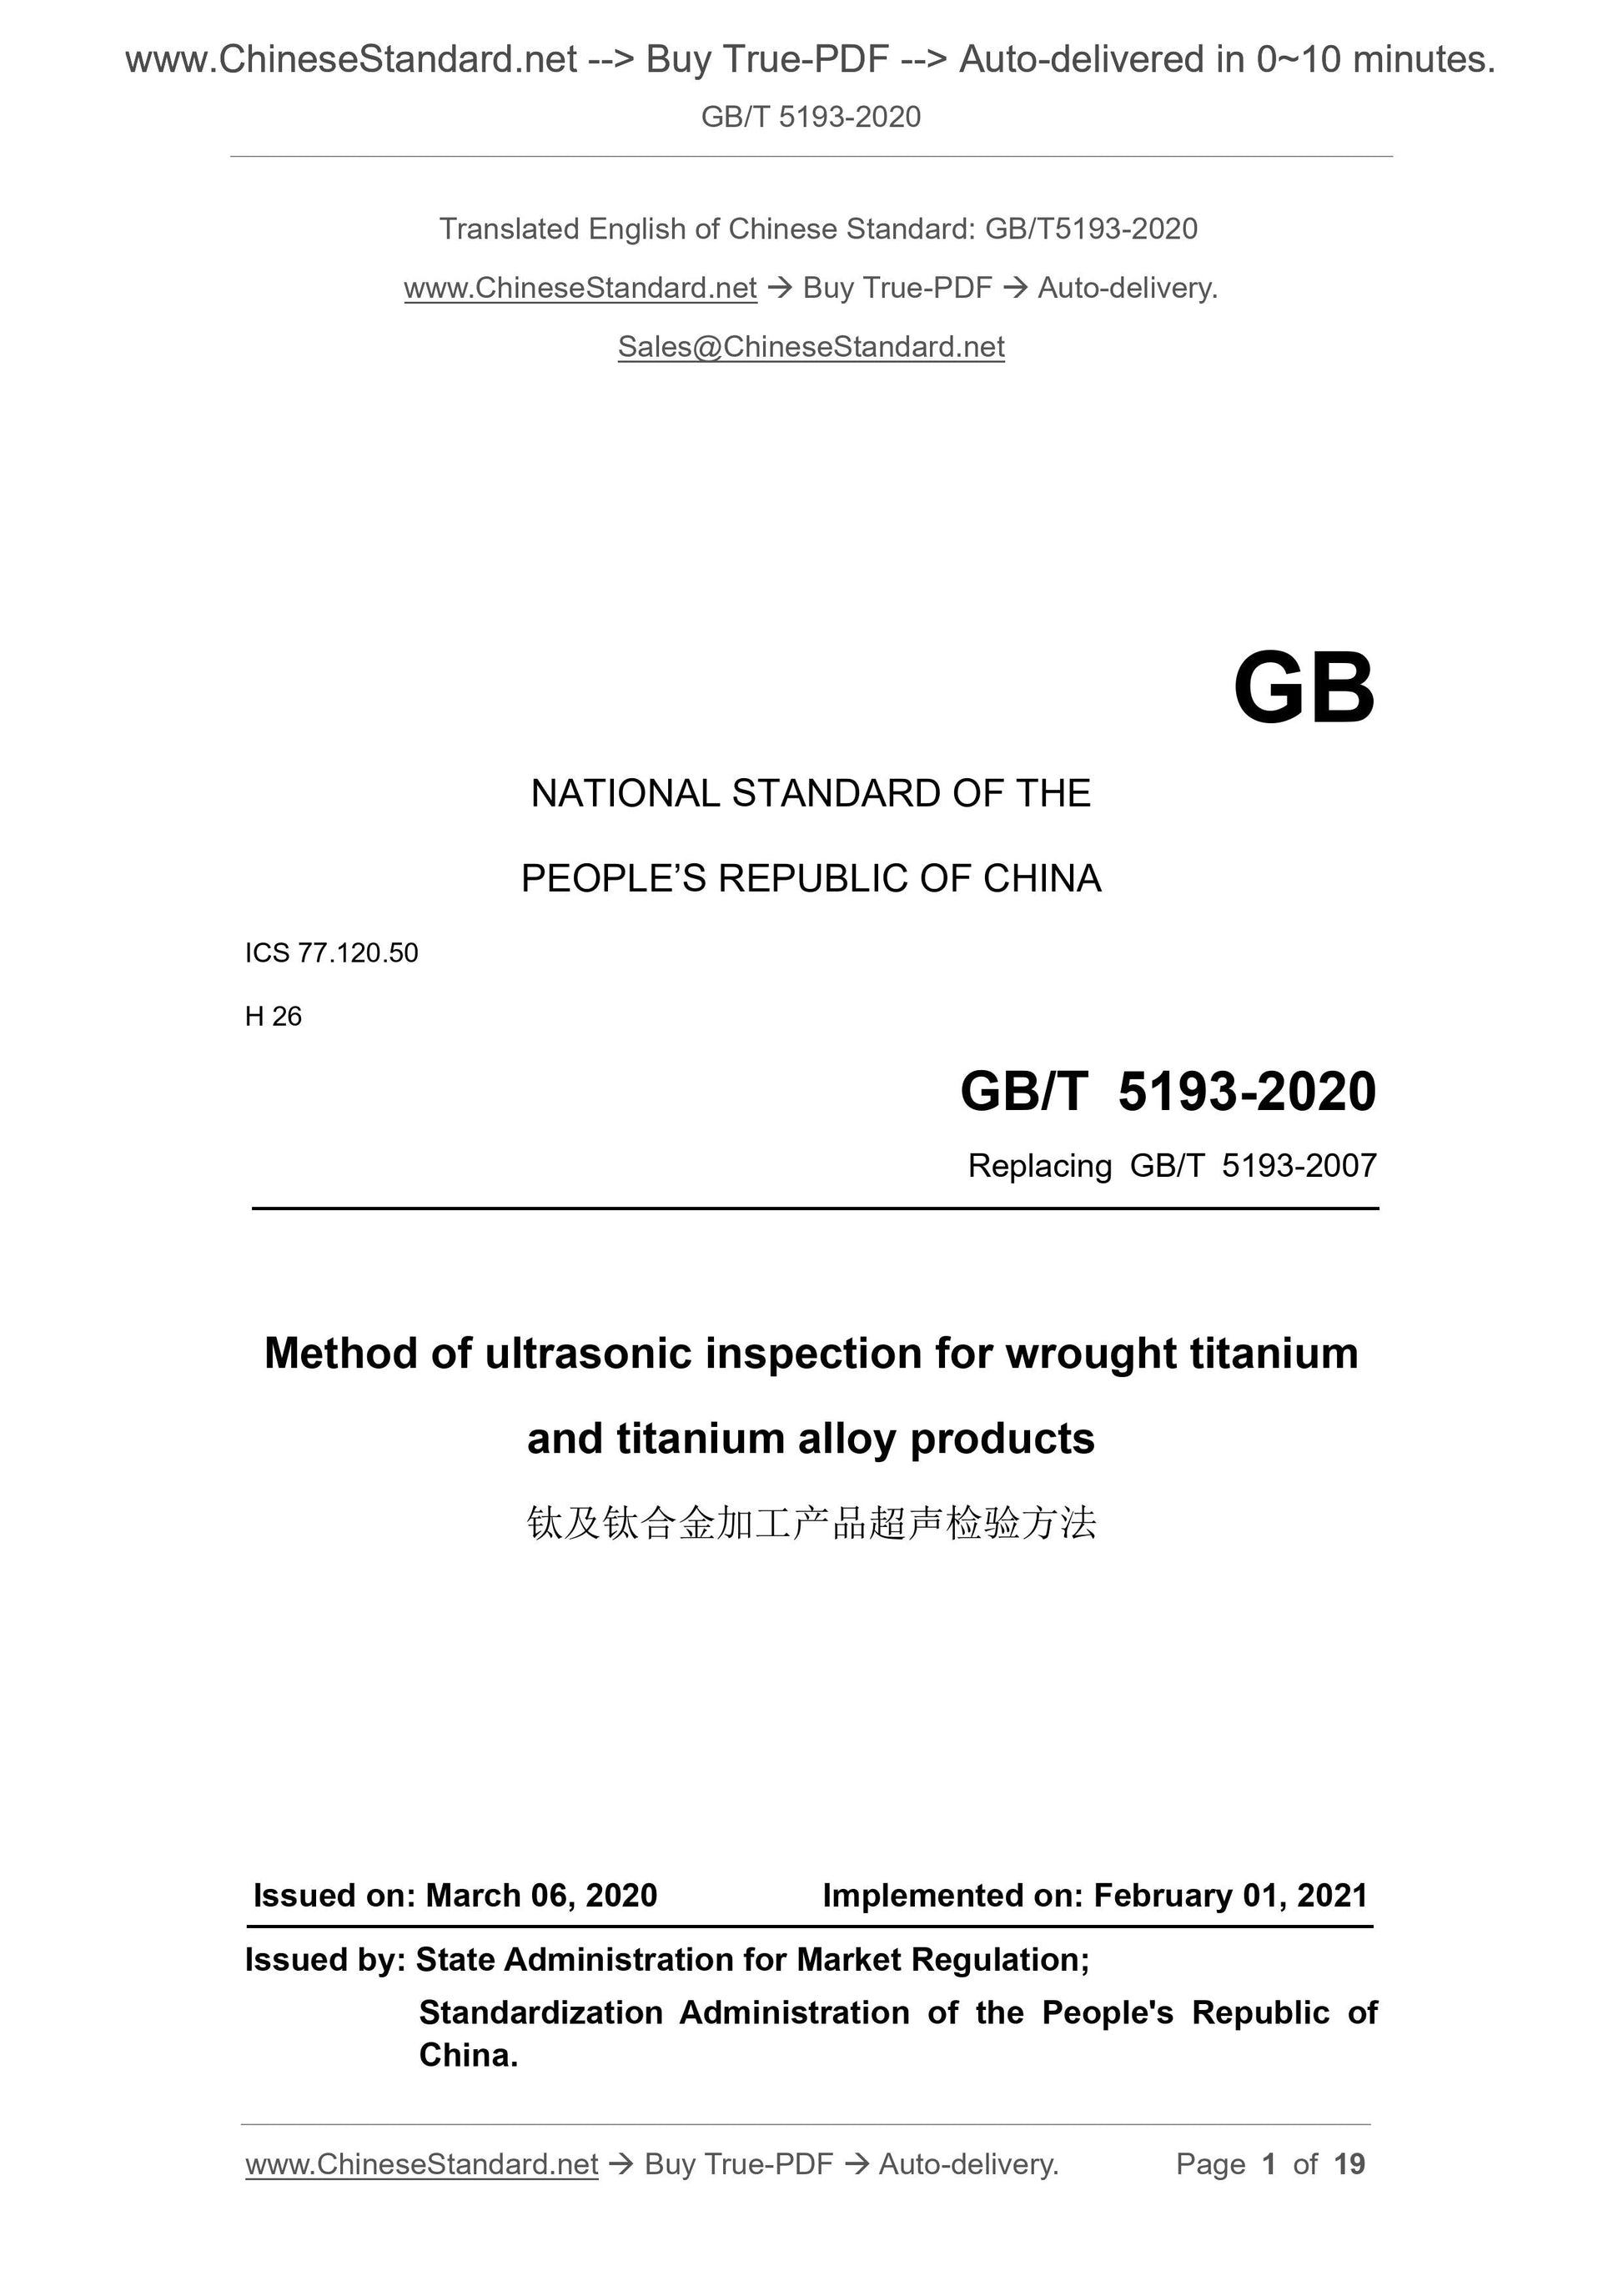 GB/T 5193-2020 Page 1